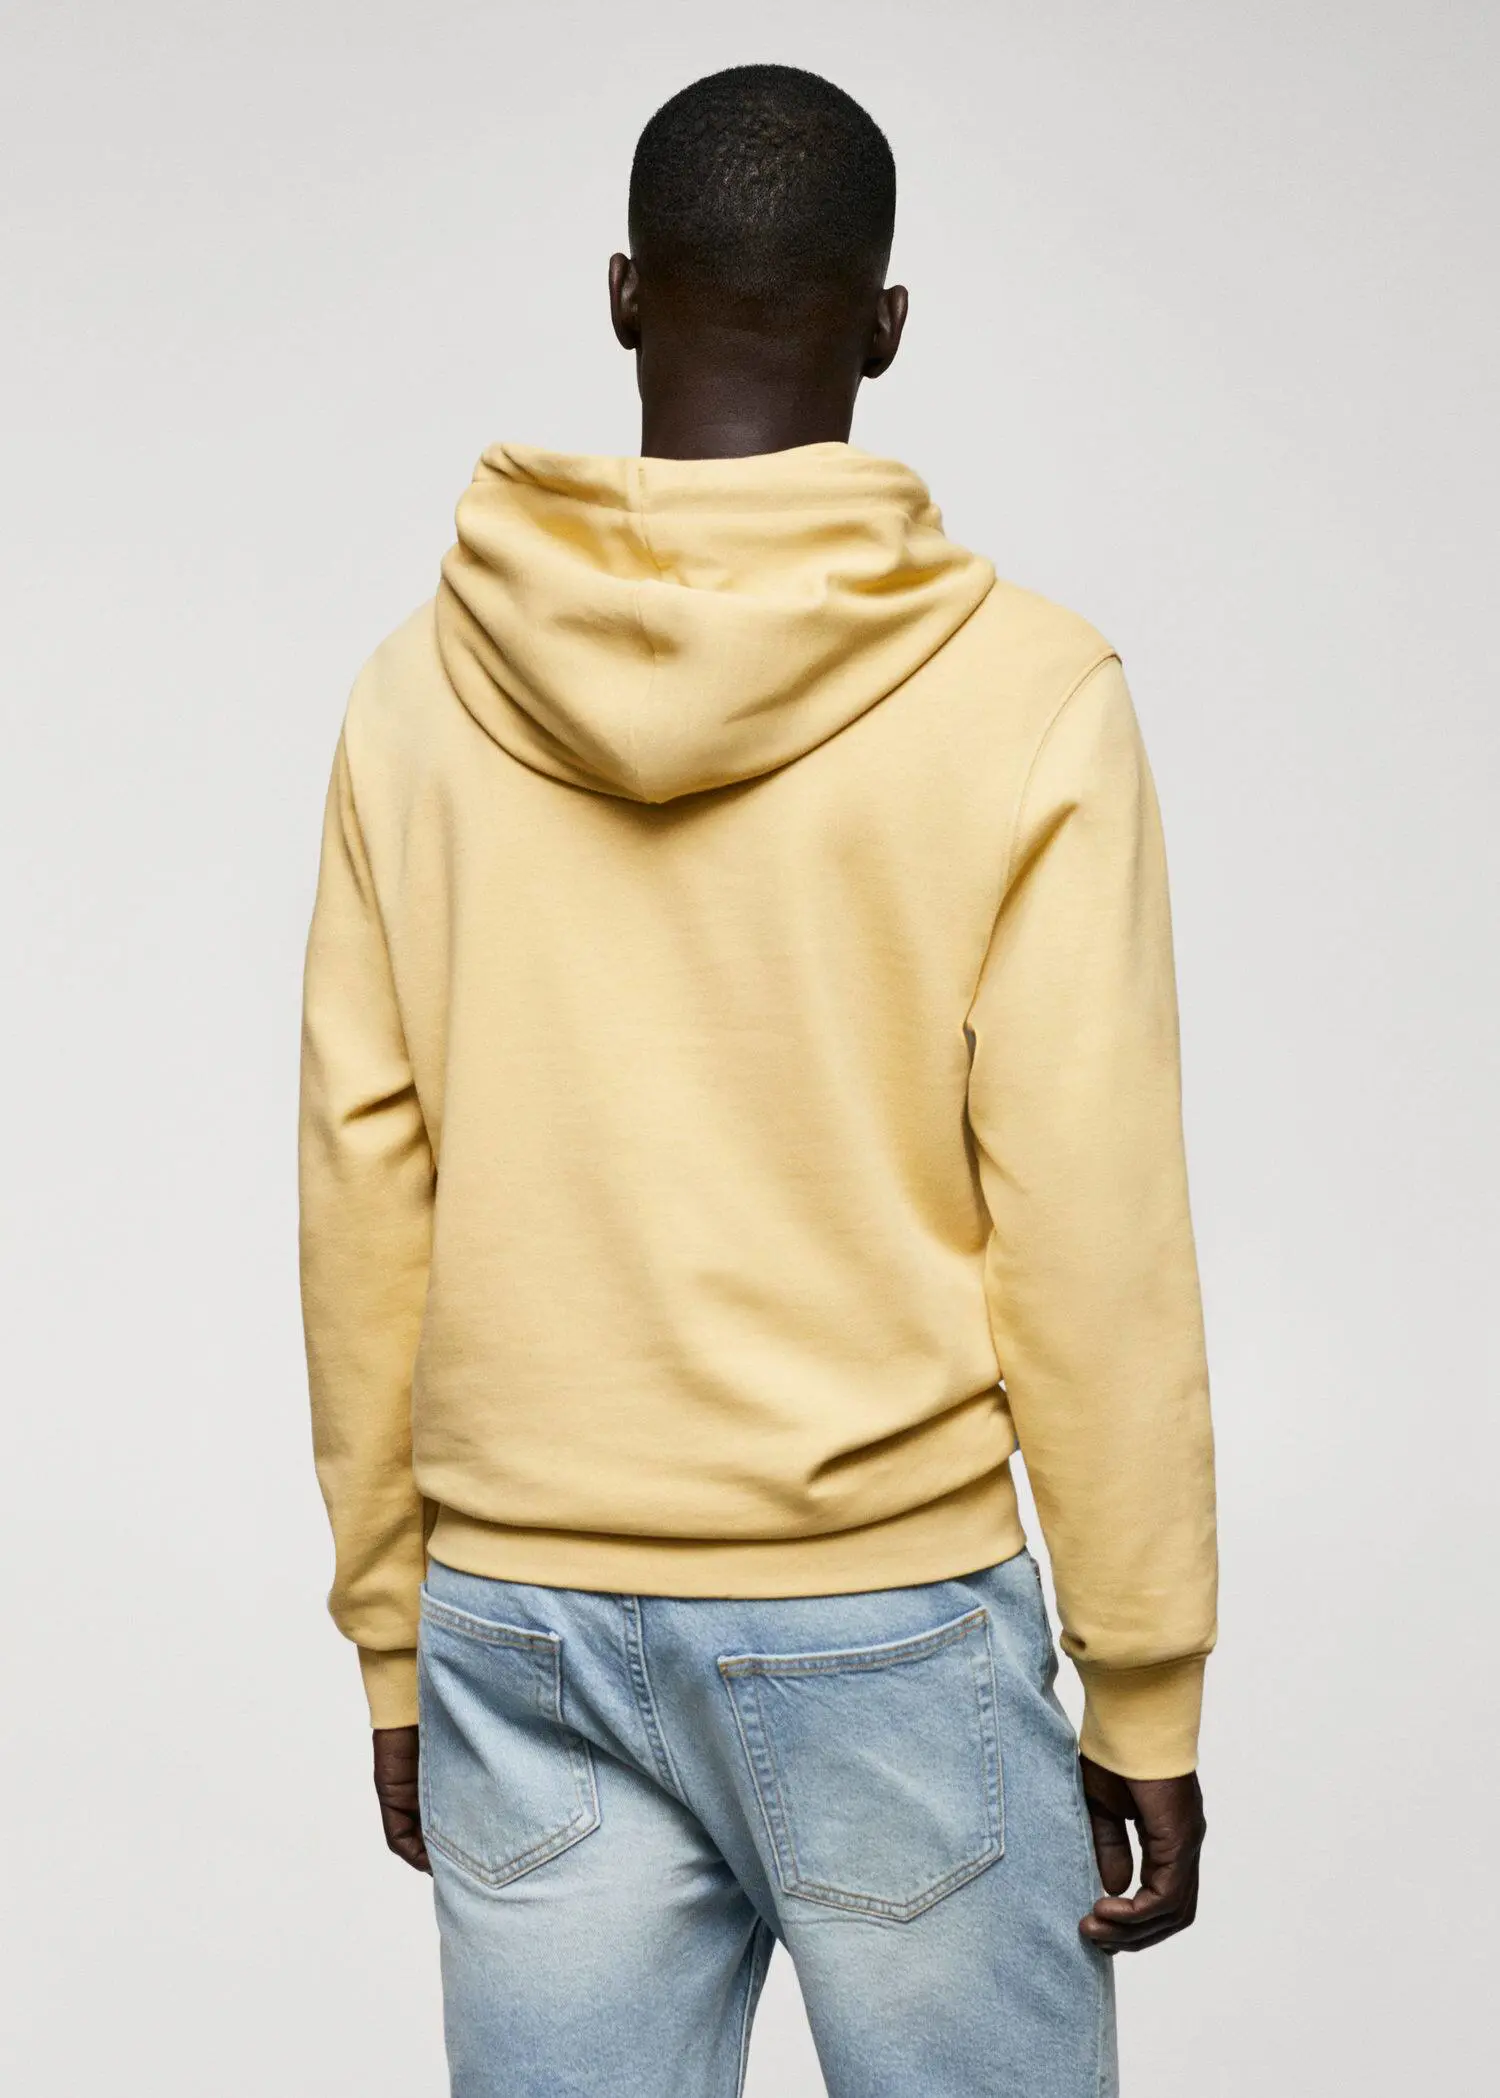 Mango Hoodie cotton sweatshirt. a person wearing a yellow hoodie and jeans. 